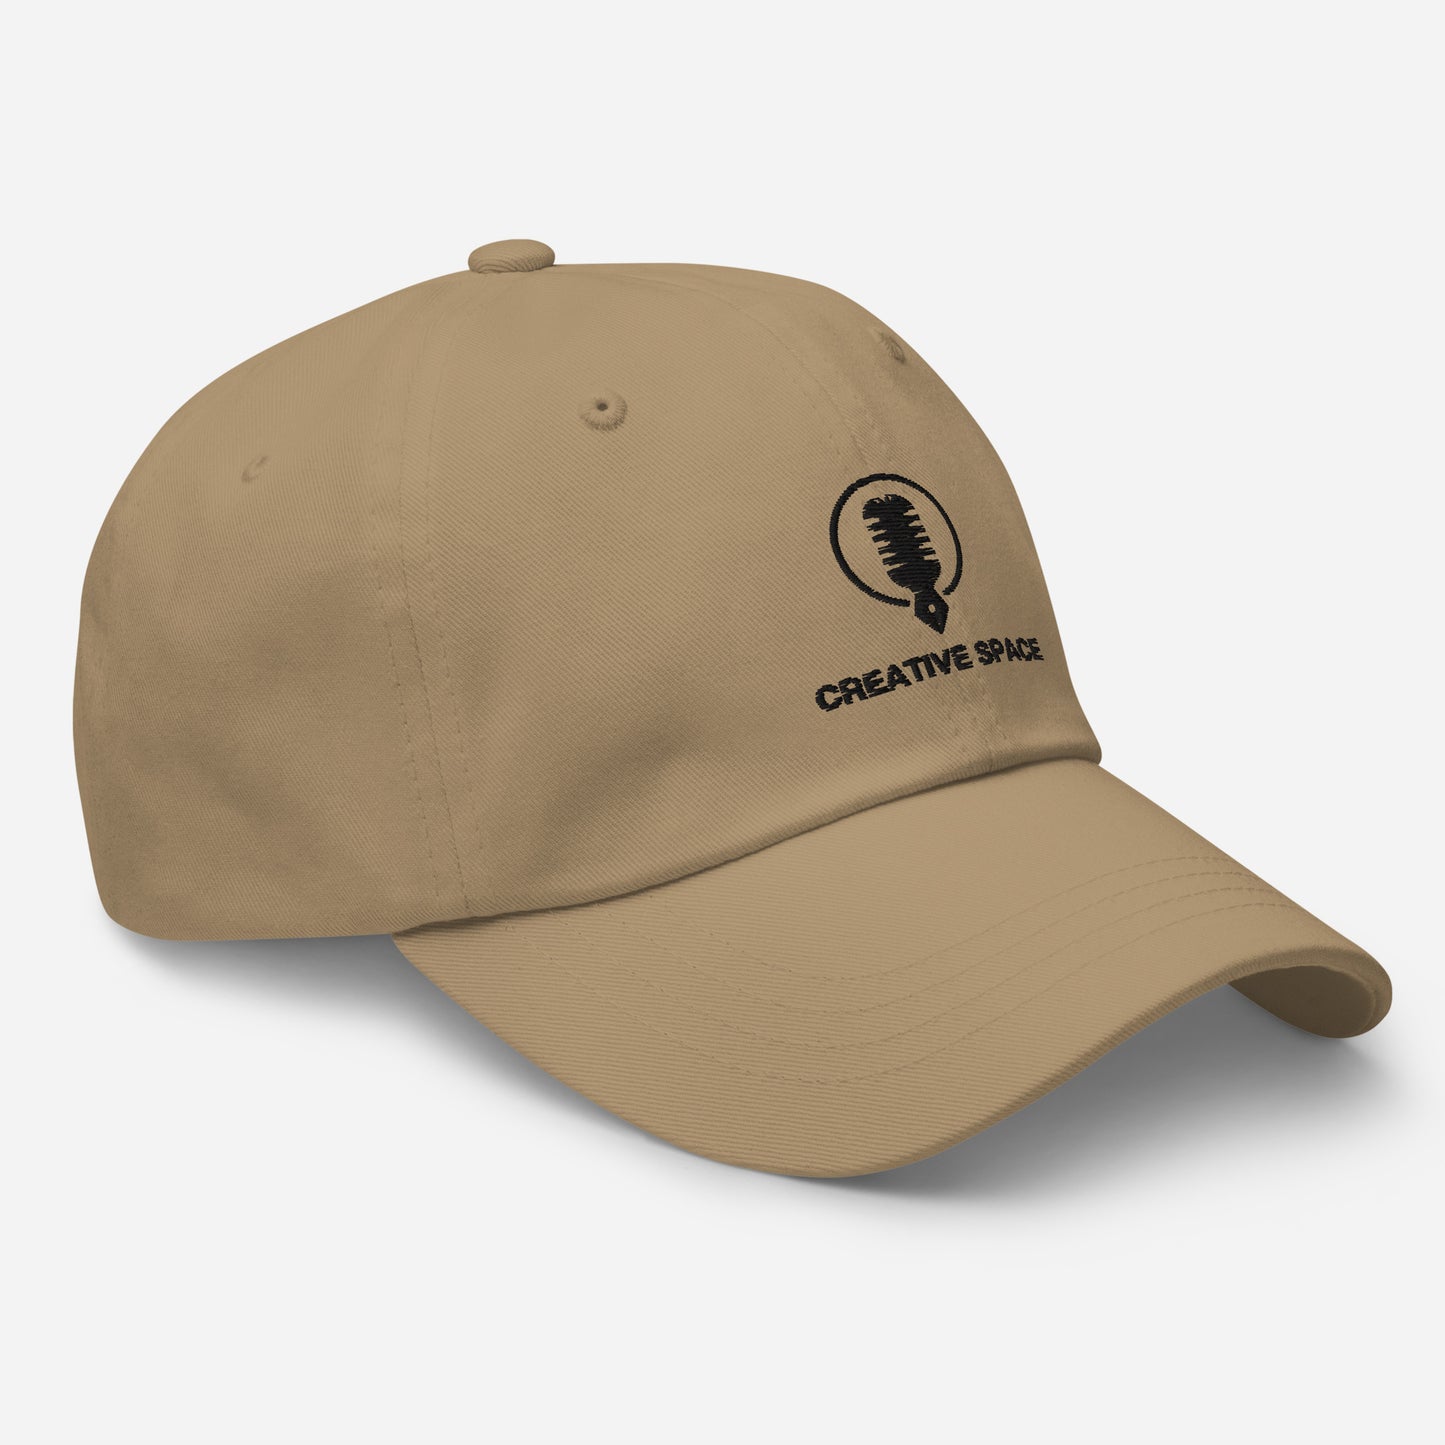 Creative Space Dad hat